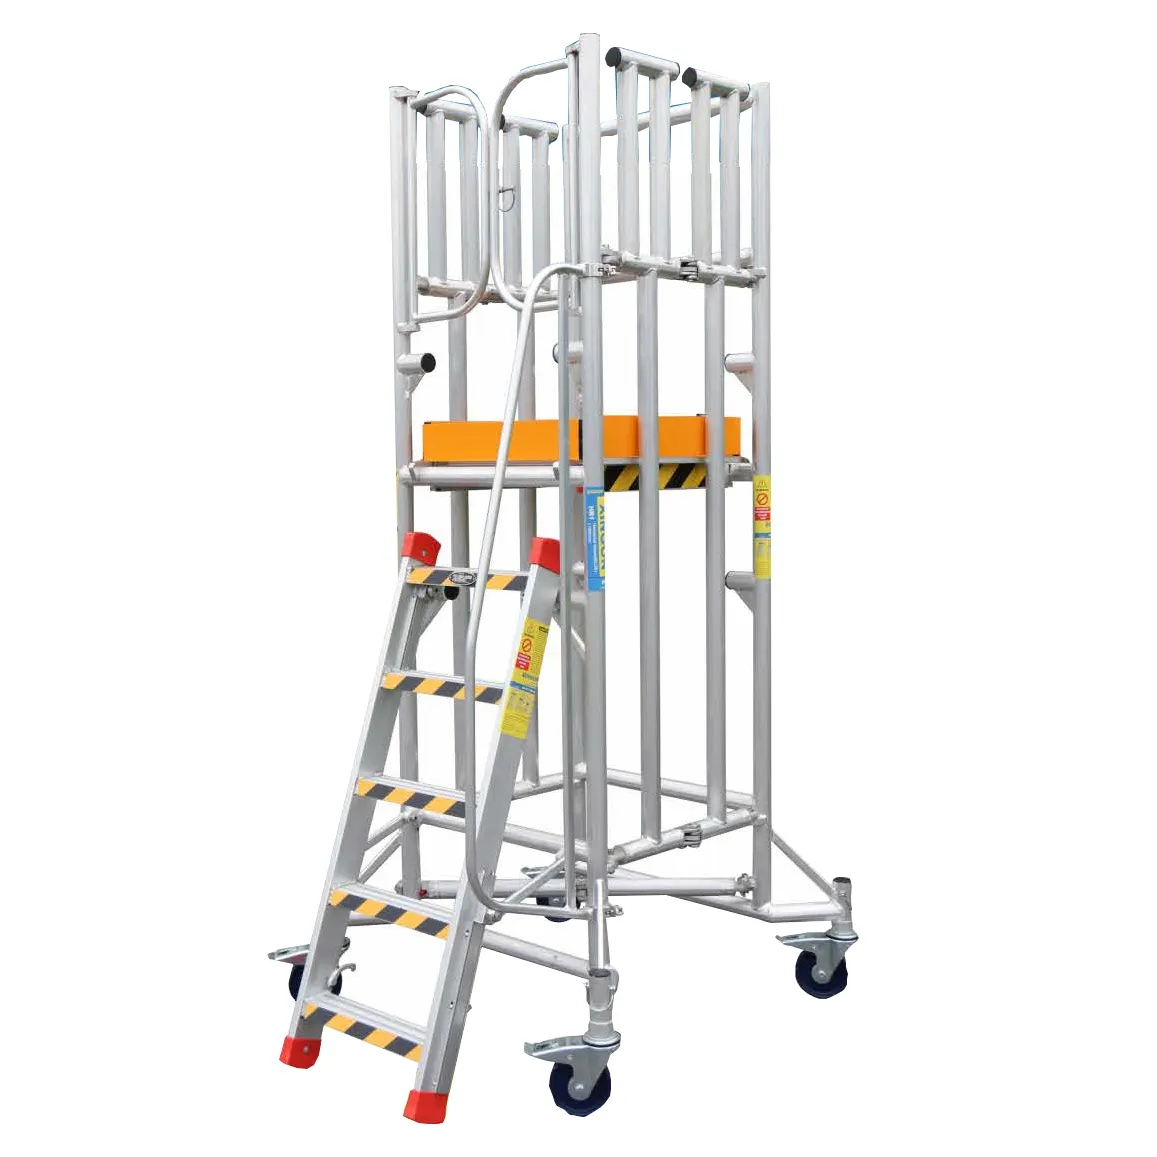 5 Sets Quick Stage Telescopic Mobile Leader For Sale Aluminum Tower Scaffolding Platform scaffolding for construction